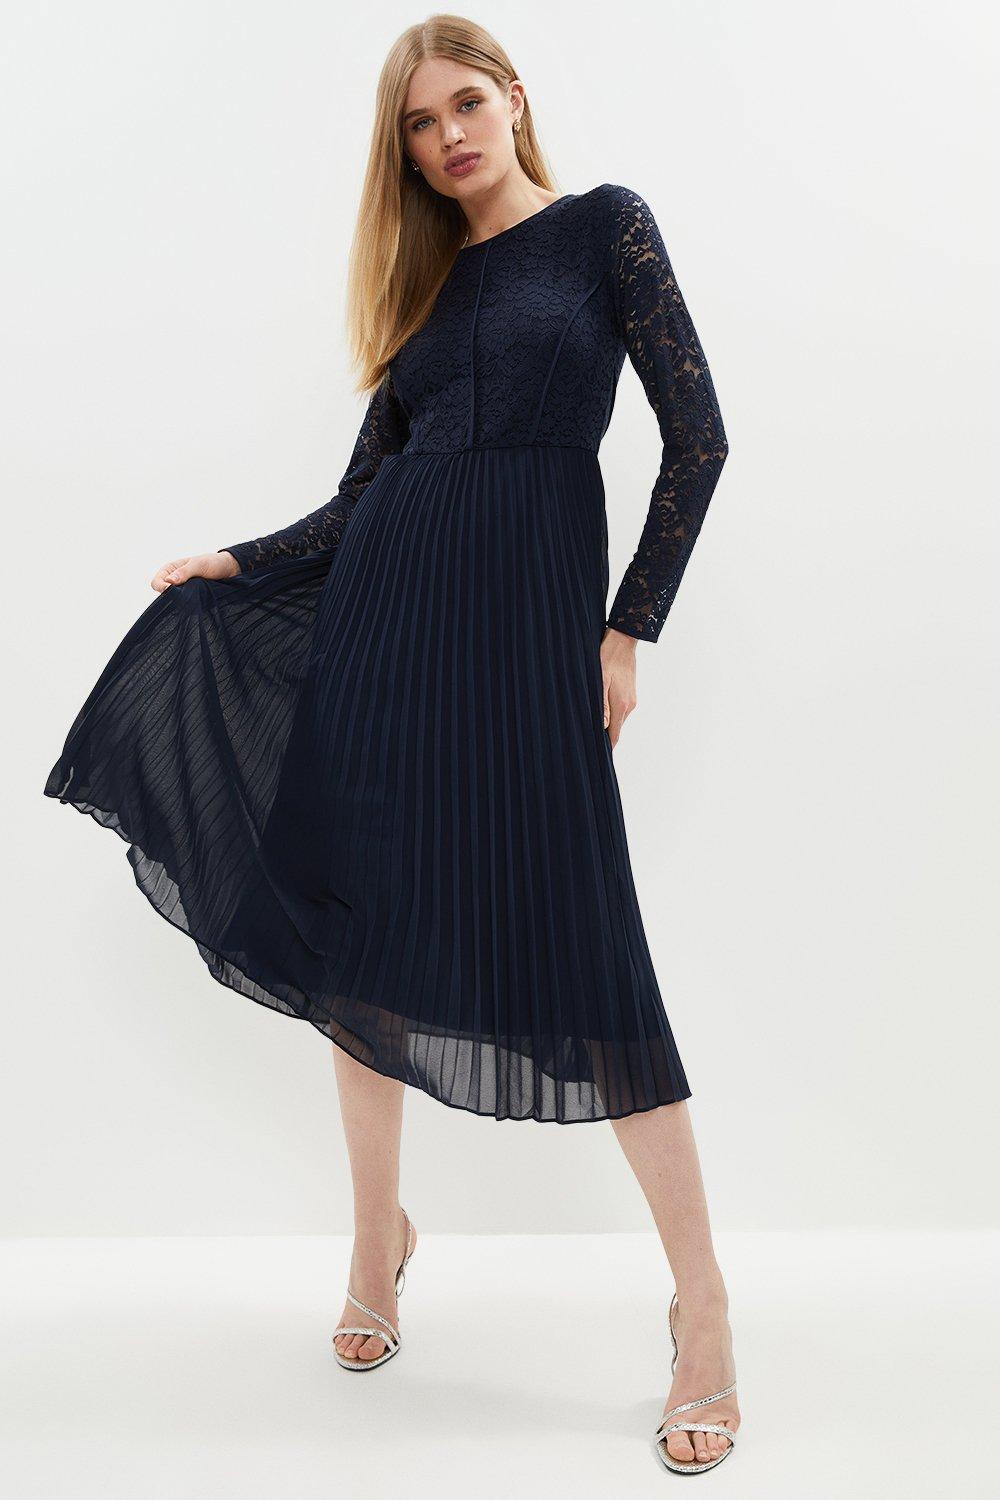 Lace Top Pleated Skirt Dress - Navy